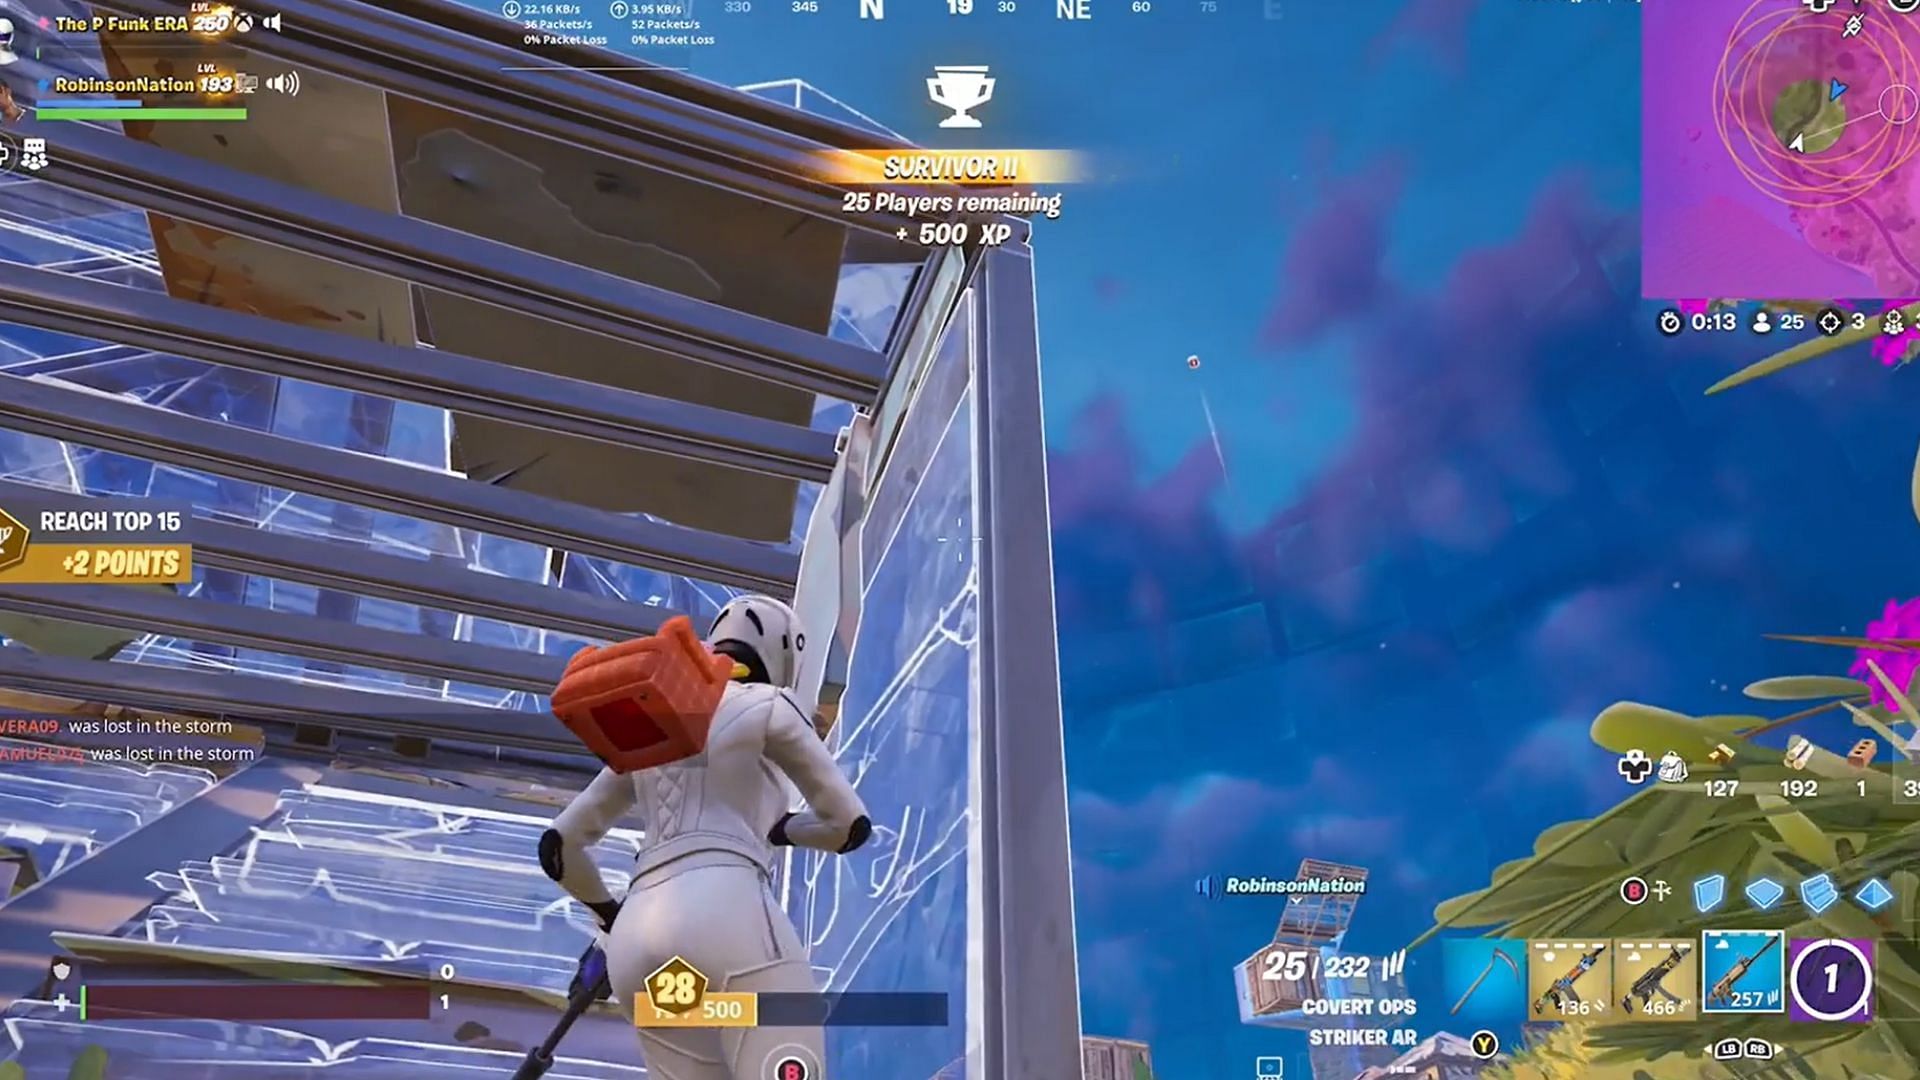 Fortnite player saves their teammate with a clutch Medkit throw, community left amazed